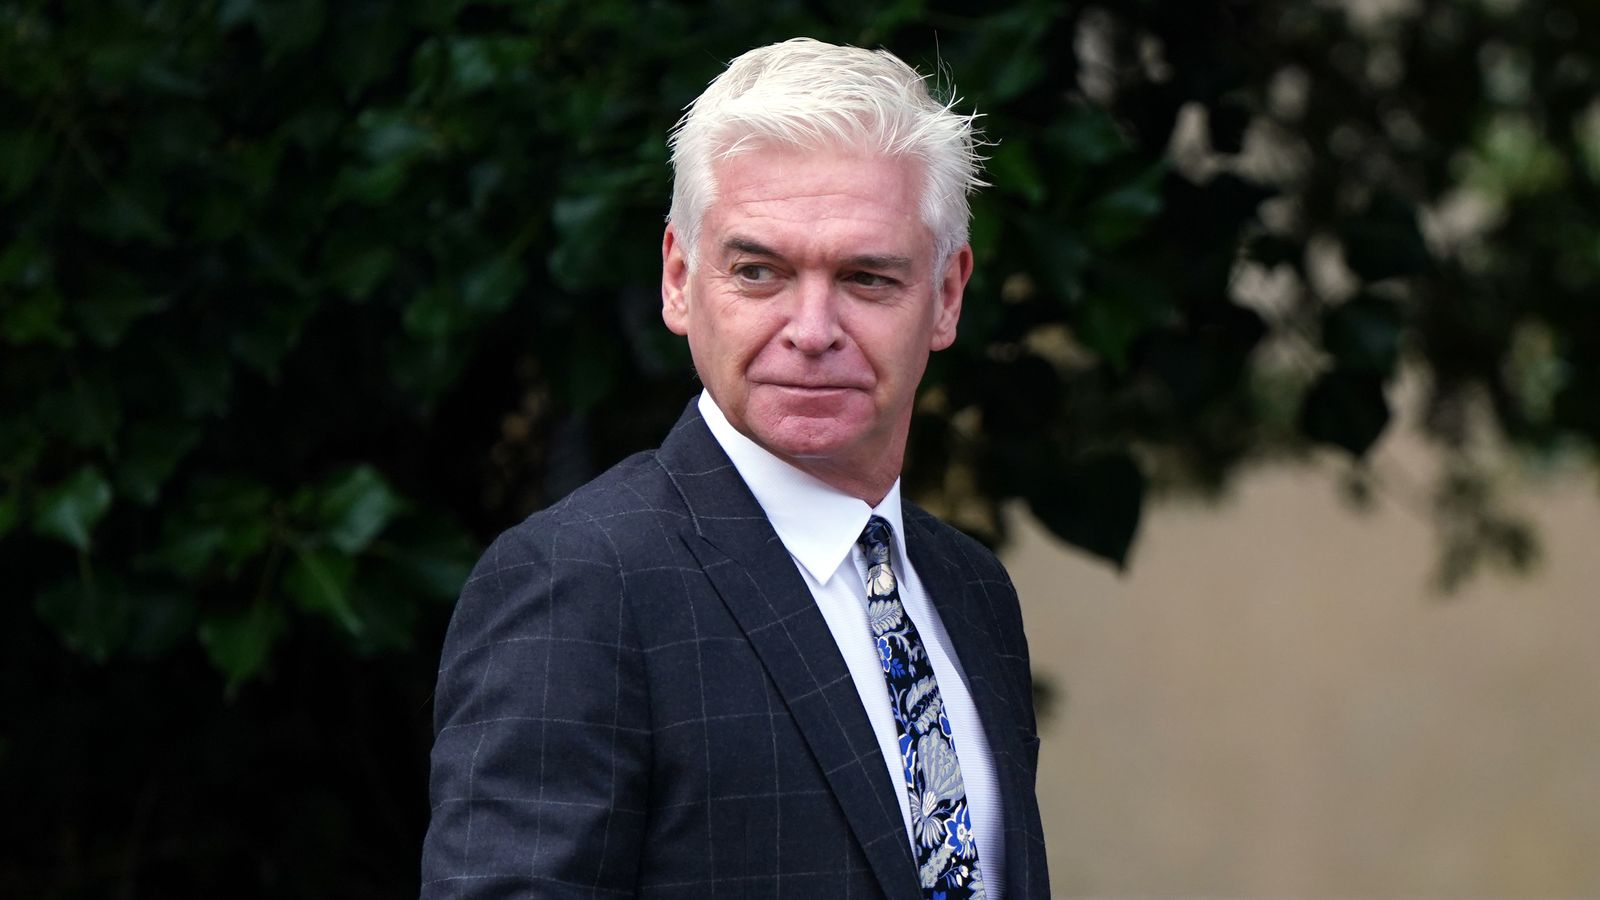 Phillip Schofield says he's 'lost everything' and apologises over affair - as he reveals where first romantic encounter took place